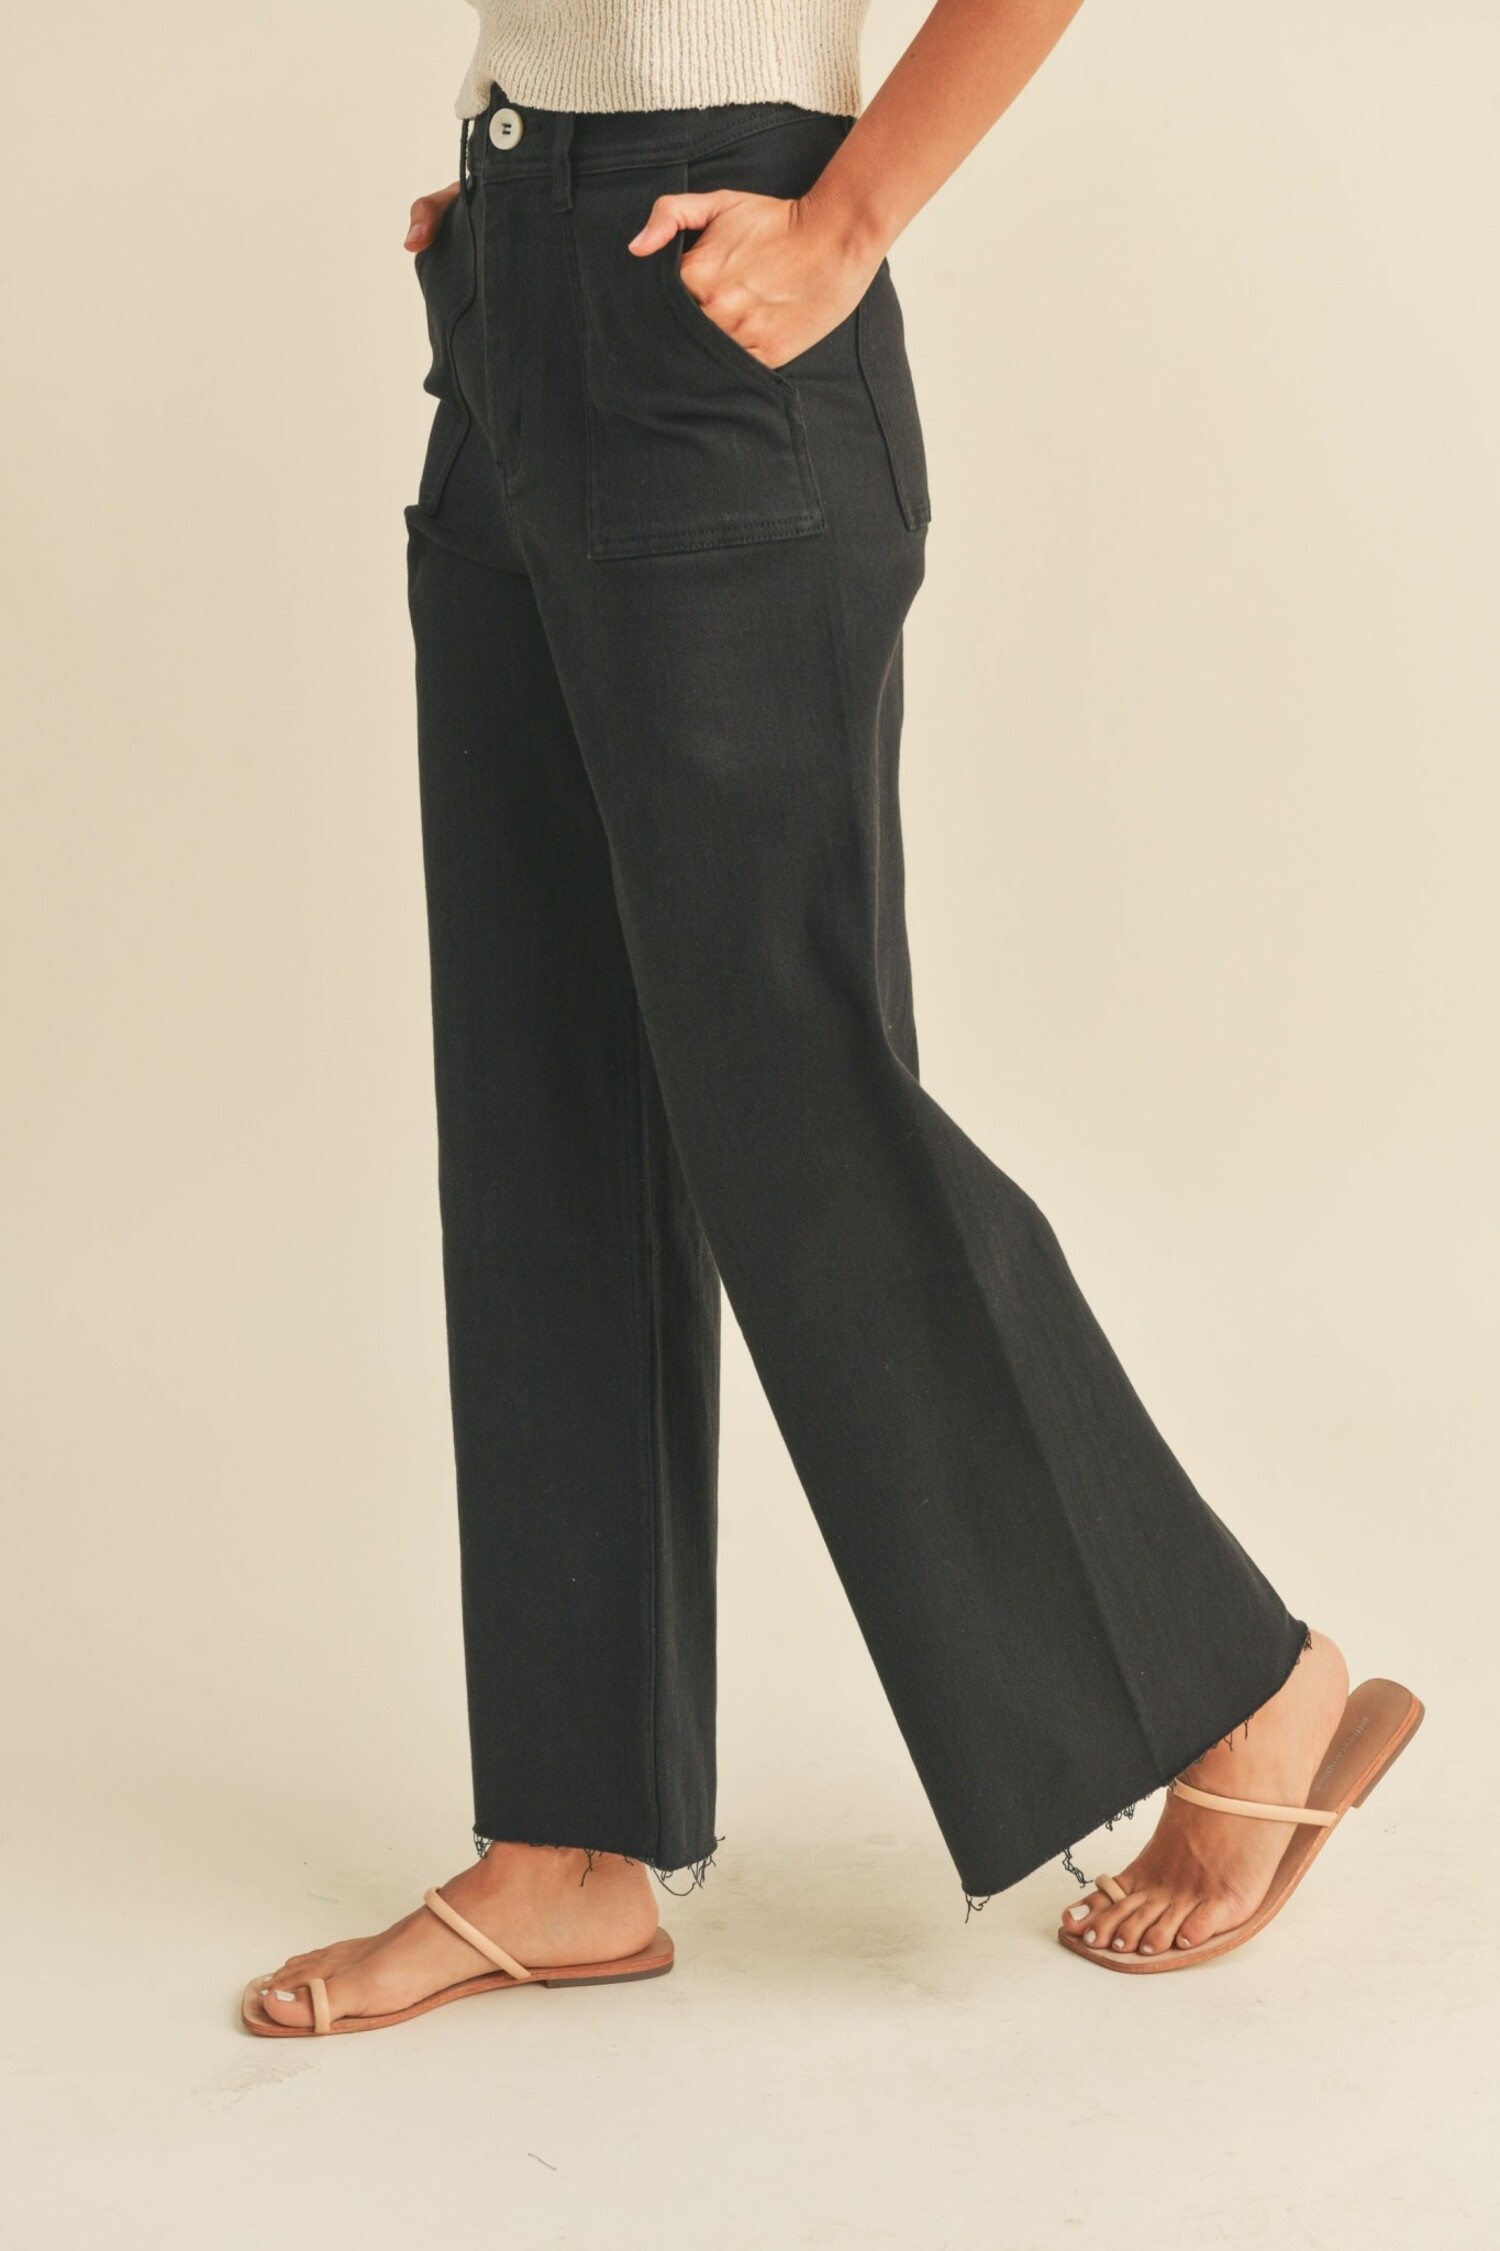 Soft Surroundings, Pants & Jumpsuits, Nwt Soft Surroundings Mirage  Embroidered Wide Leg Pants